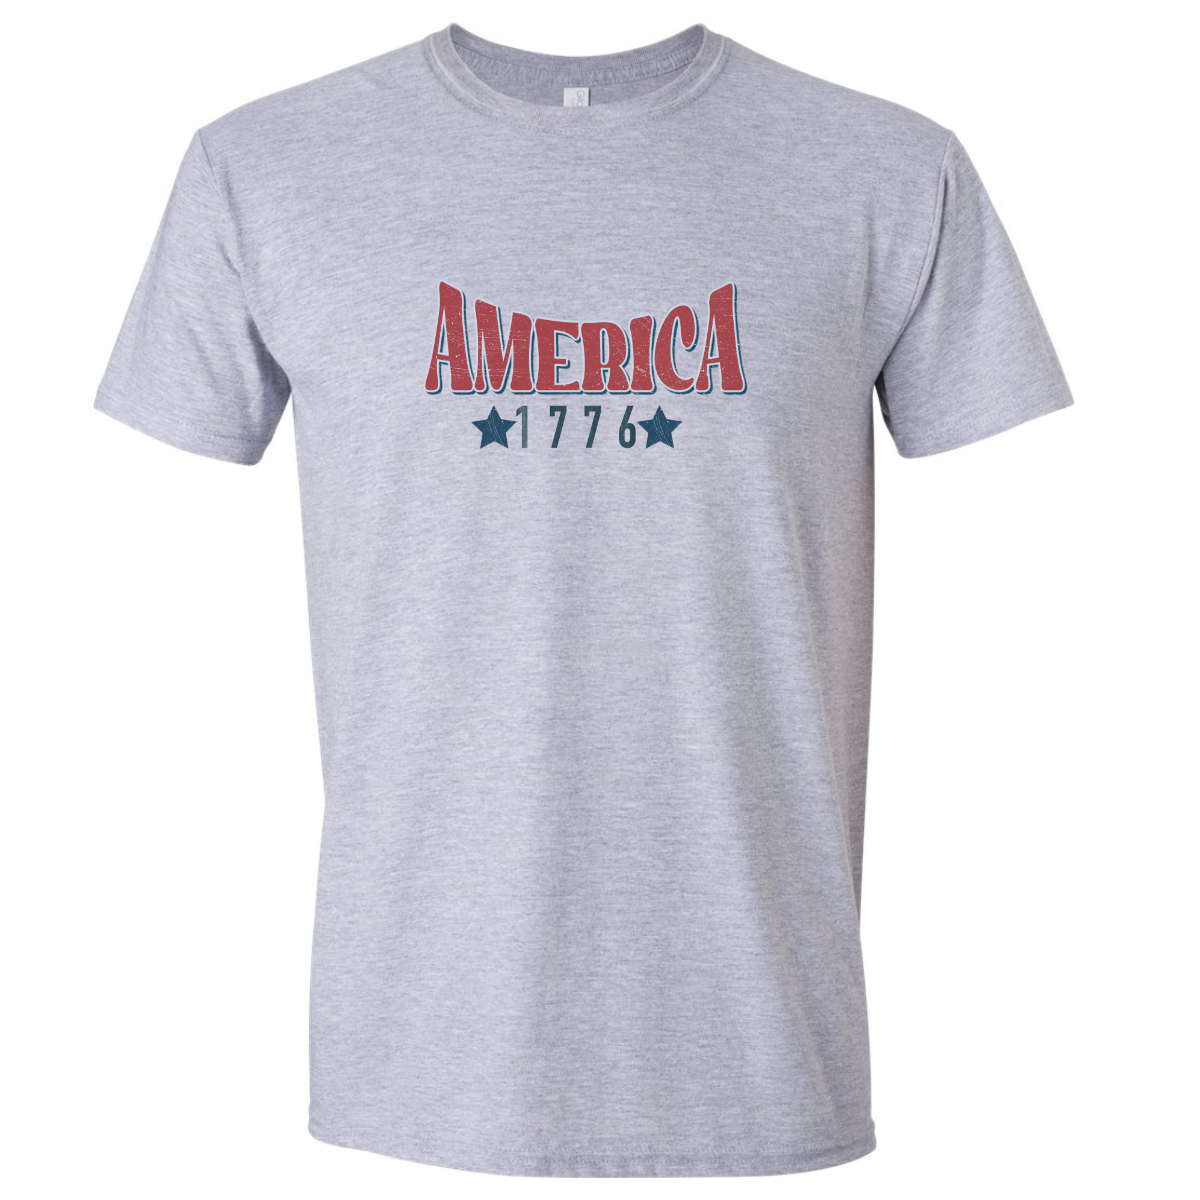 America 1776 - 4th of July Patriotic Print Apparel for the Modern Patriot